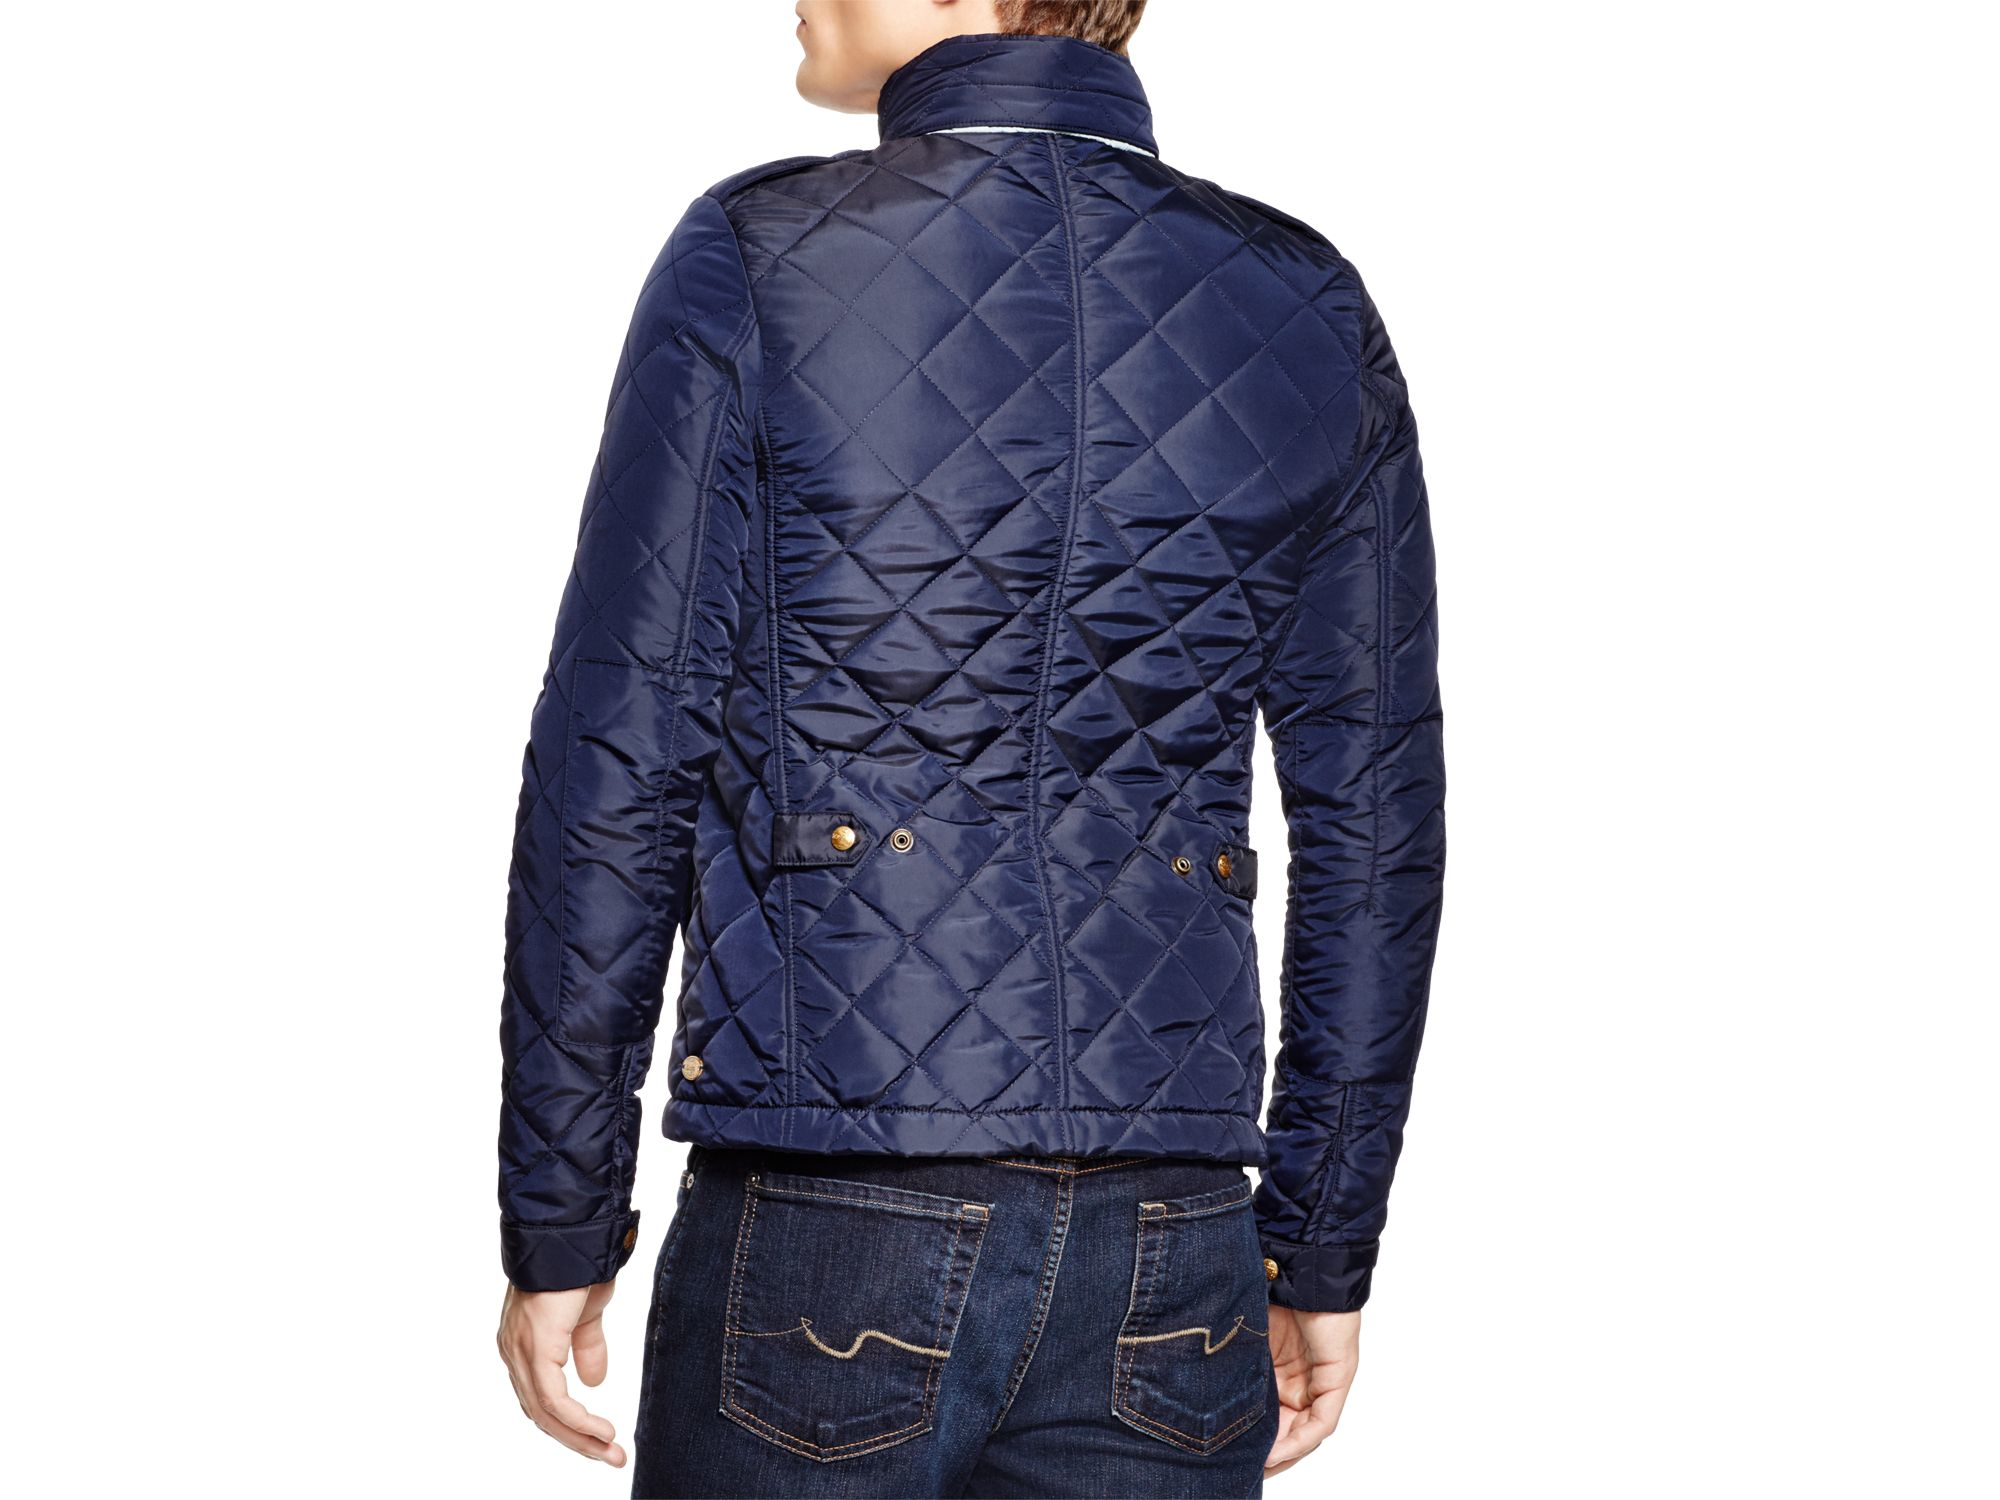 Scotch & Soda Nylon Quilted Oxford Jacket in Night (Blue) for Men - Lyst